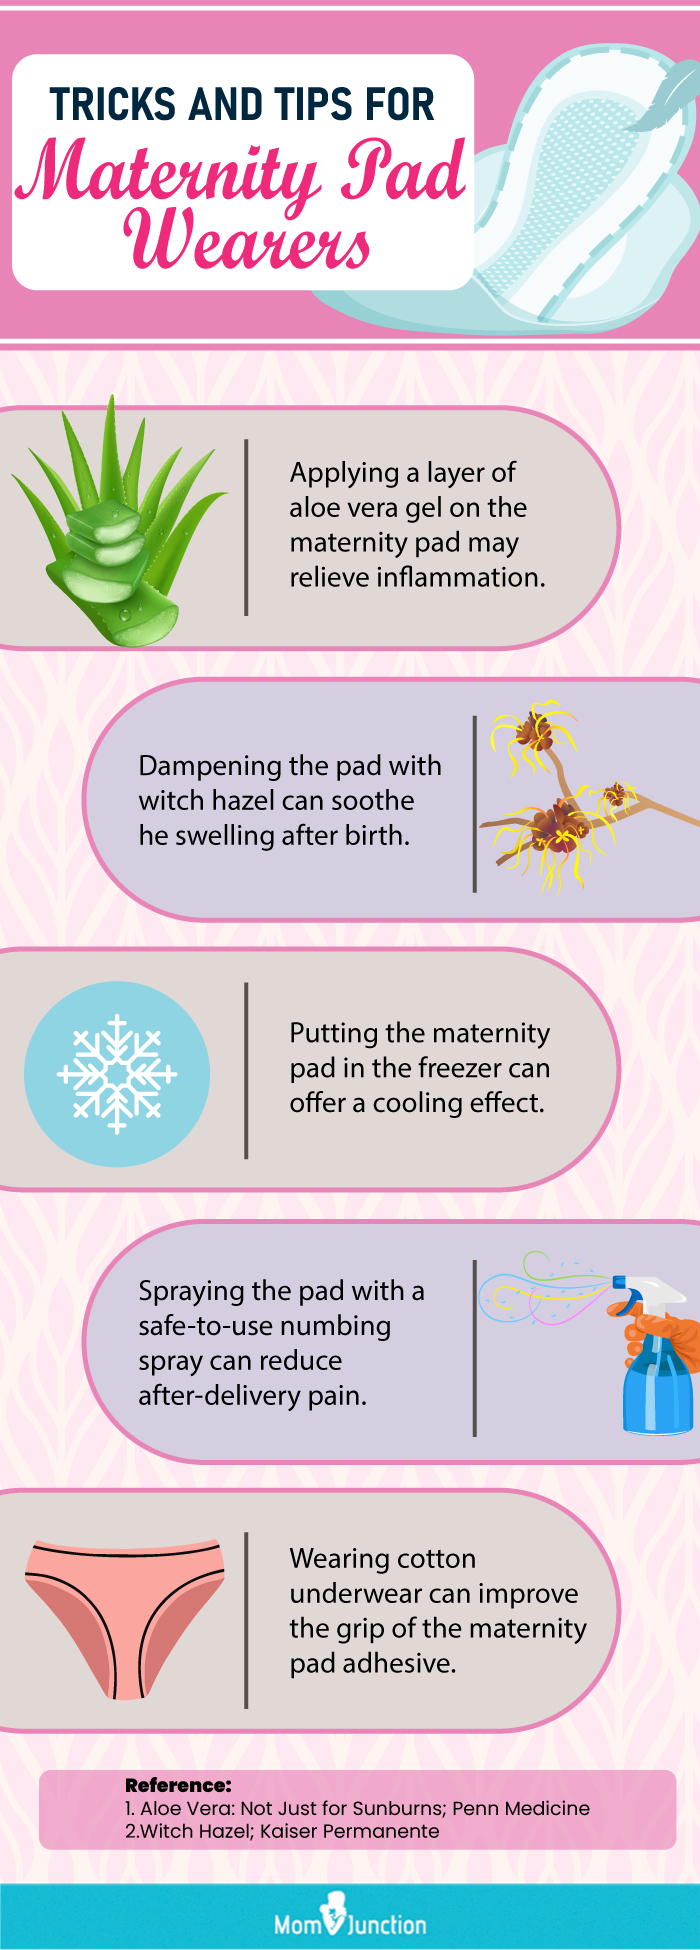 https://www.momjunction.com/wp-content/uploads/2021/10/Infographic-Tips-On-Making-Maternity-Pads-More-Effective.jpg